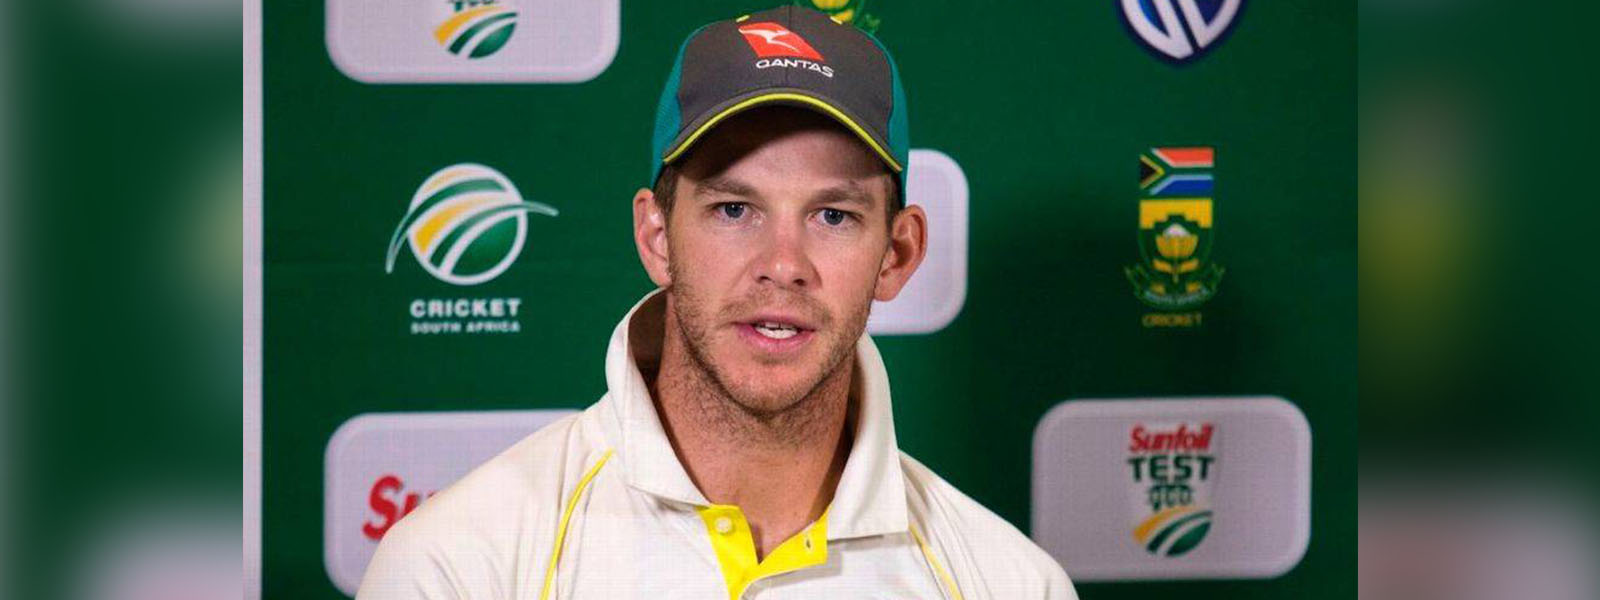 Match fixing claims are unsubstantiated- Tim Paine